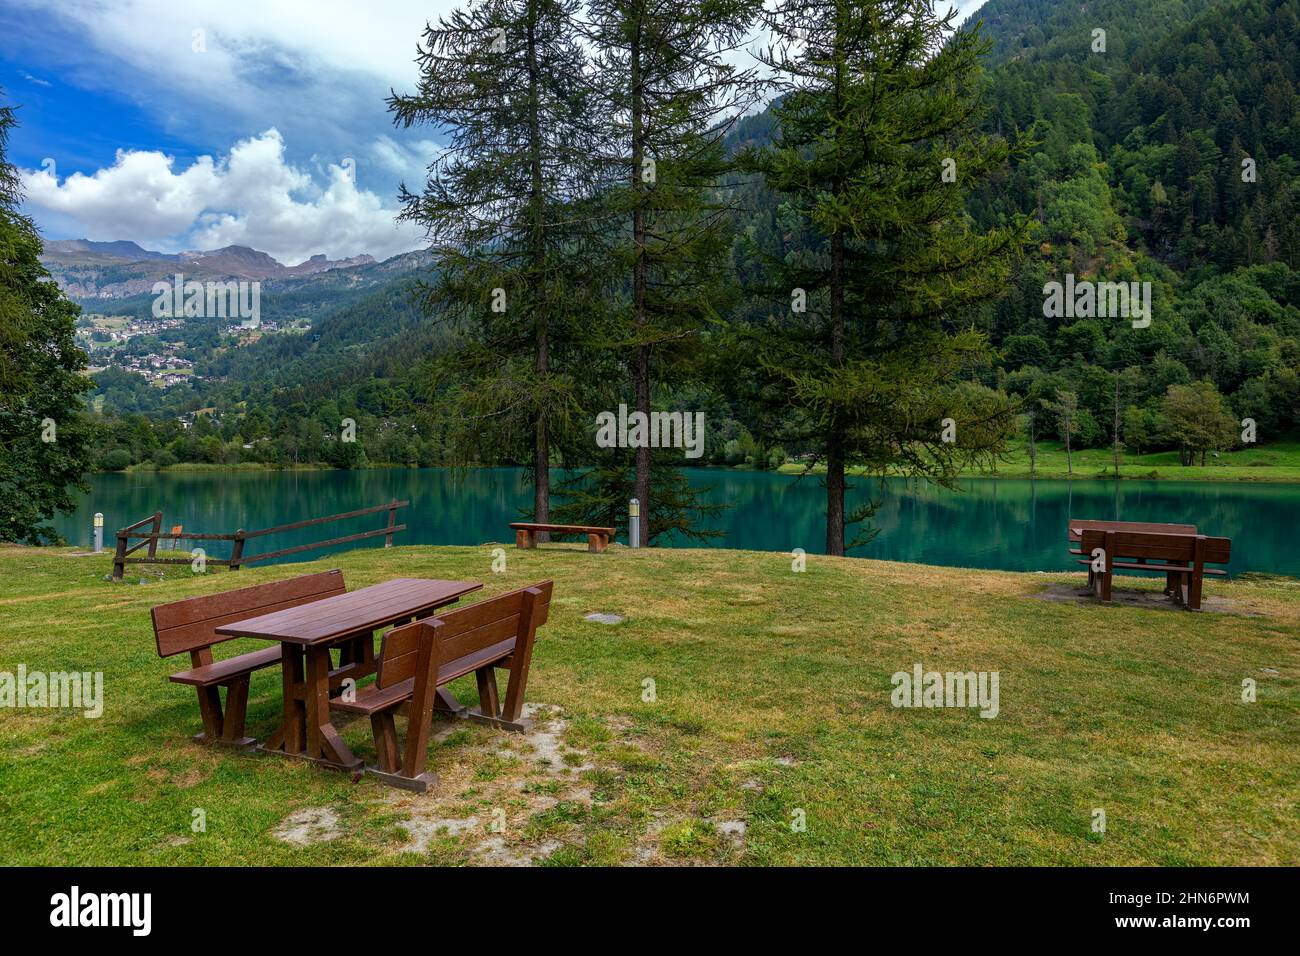 Picnic tables on the shore of the alpine Lake Maen in Aosta Valley region in Northern Italy. Stock Photo